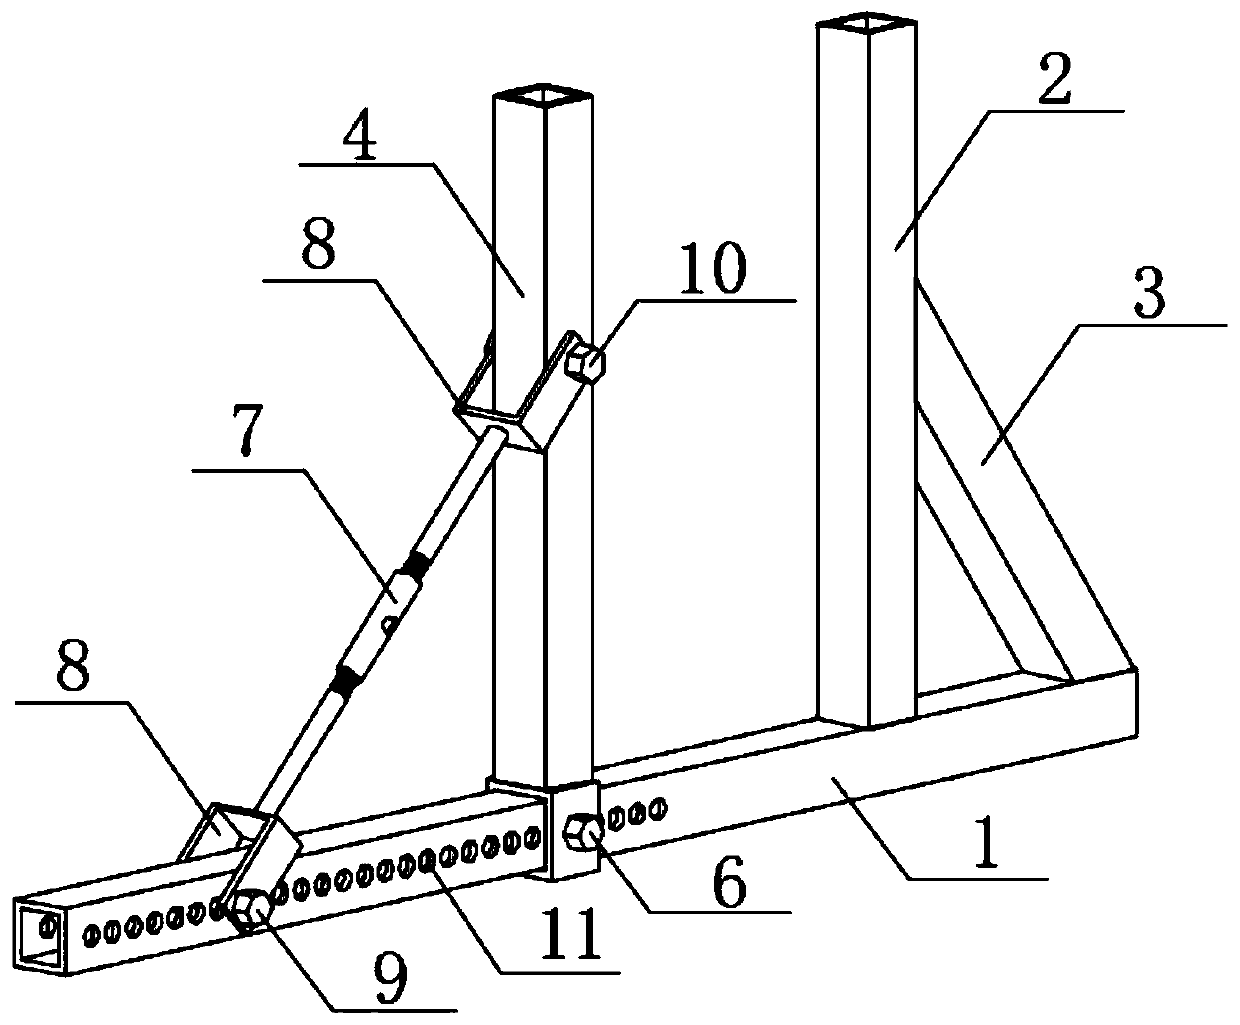 Structural beam formwork reinforcing device and method without split bolts